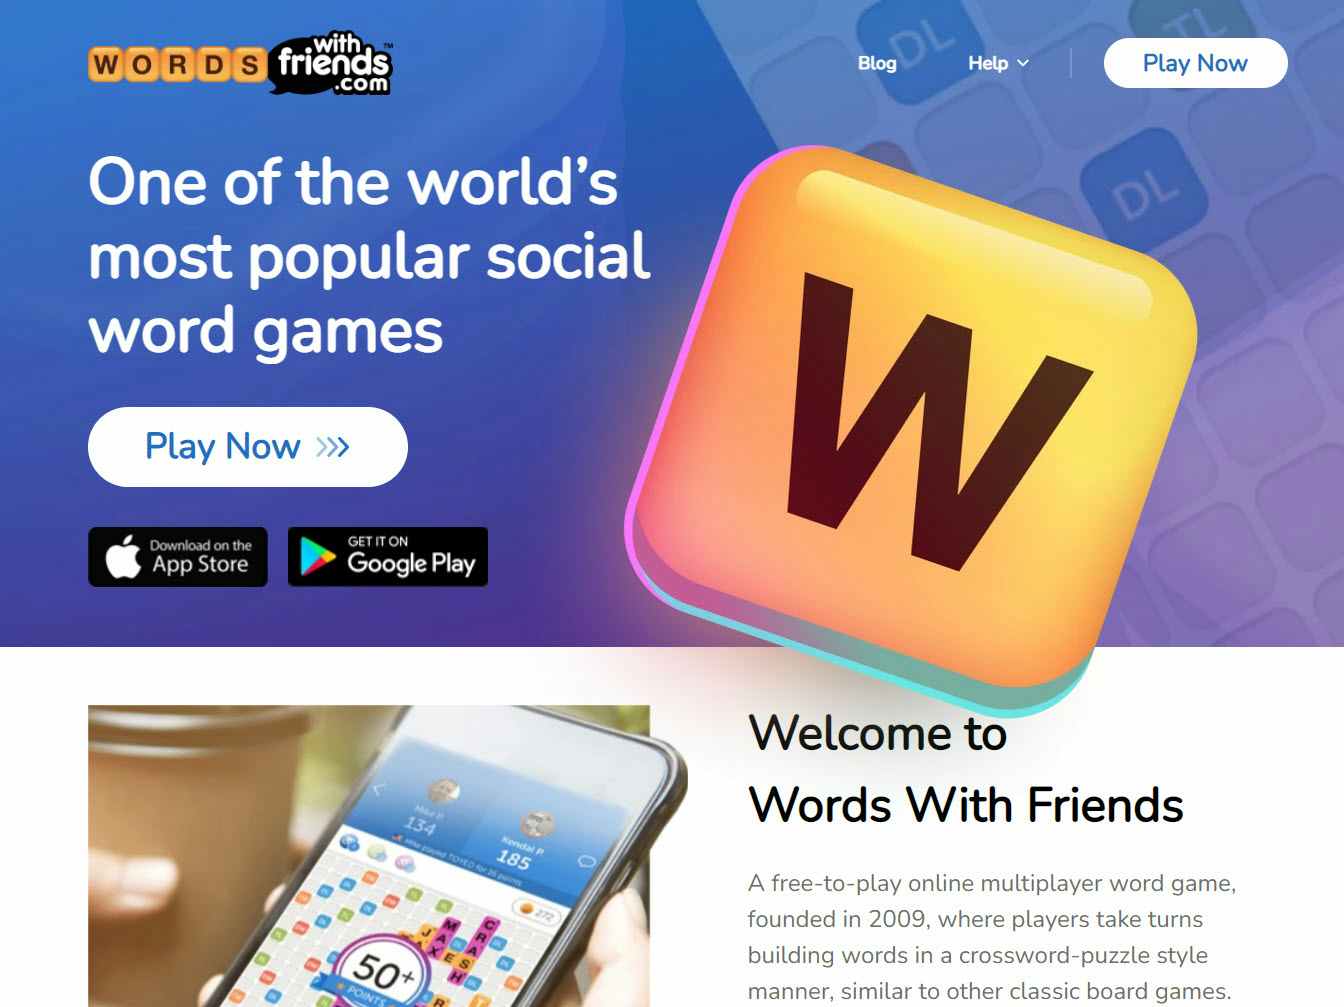 200+ Free Online Games to Play with Family & Friends During the